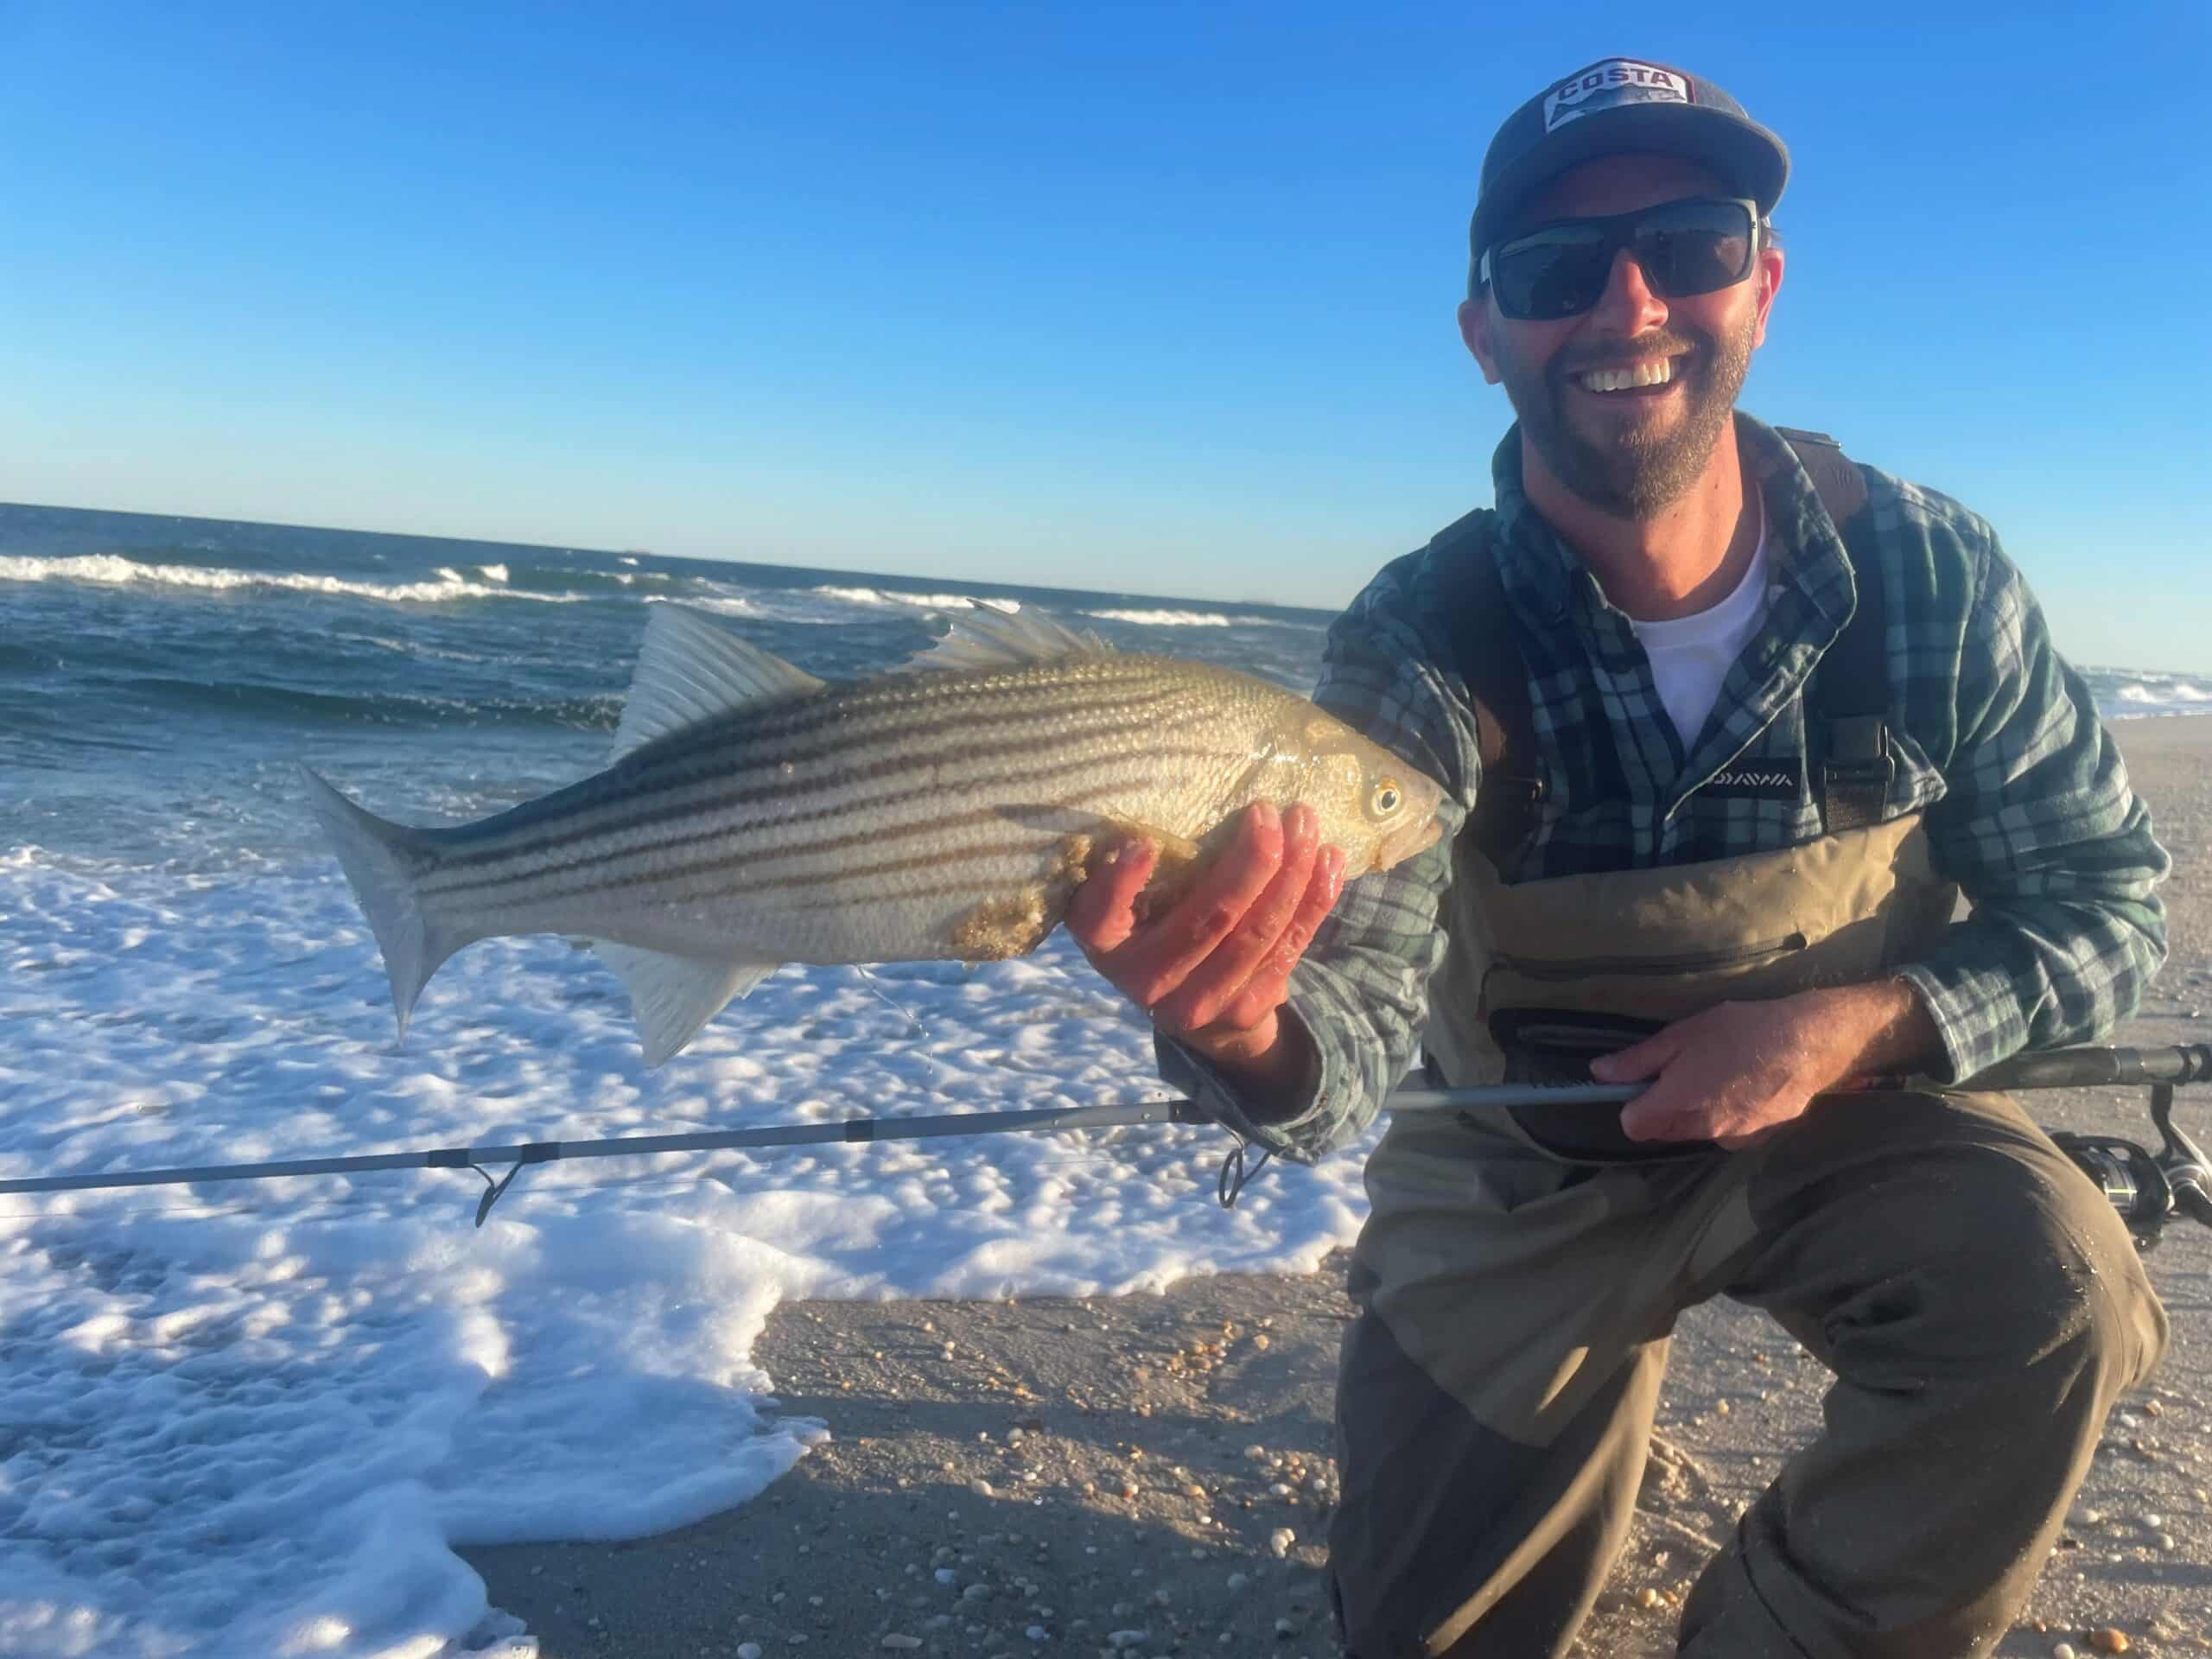 Atlantic States Marine Fisheries Commission Meeting - Stripers and